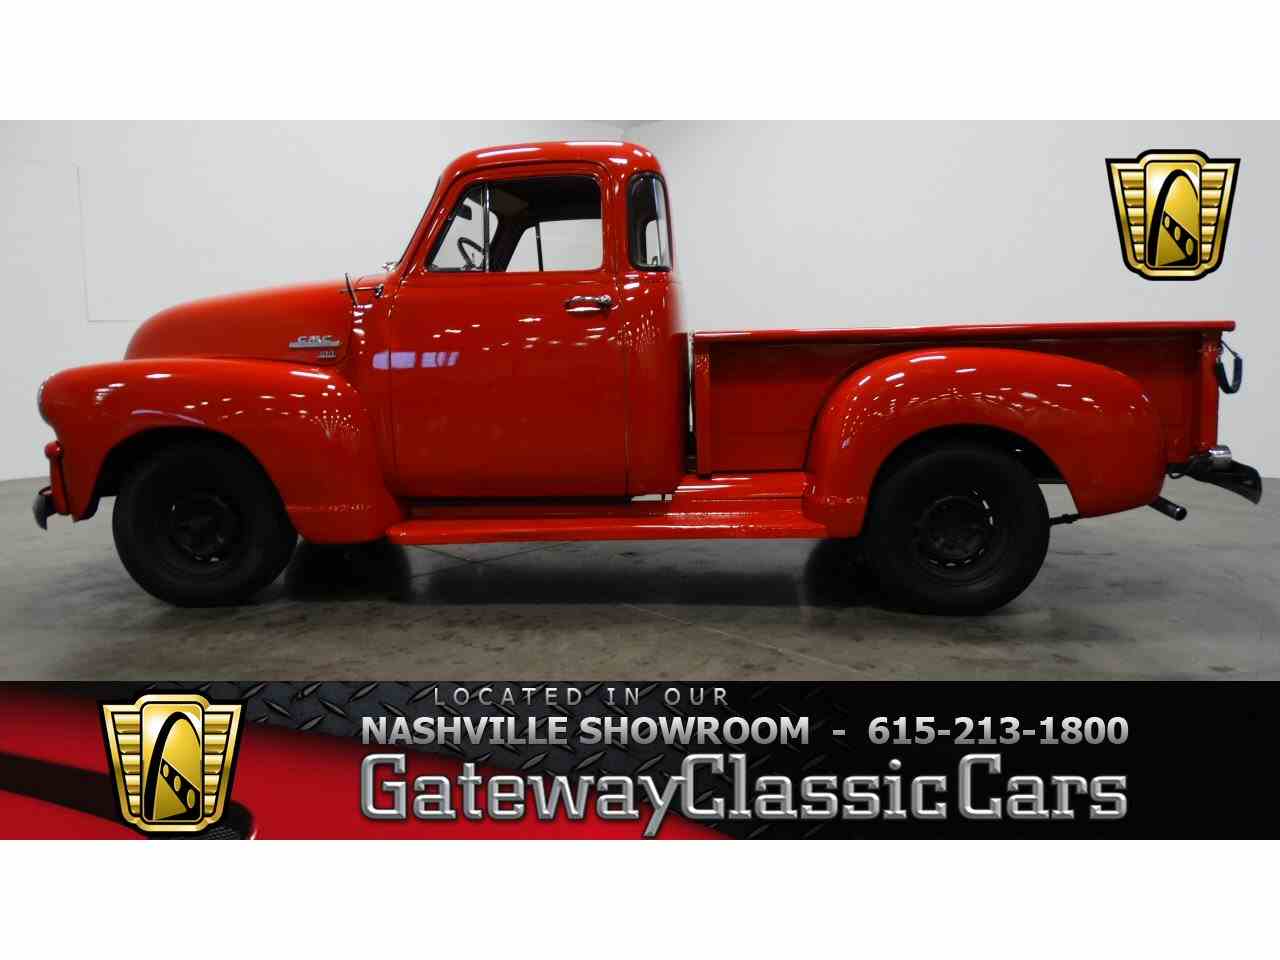 1954 Gmc 100 Backgrounds on Wallpapers Vista